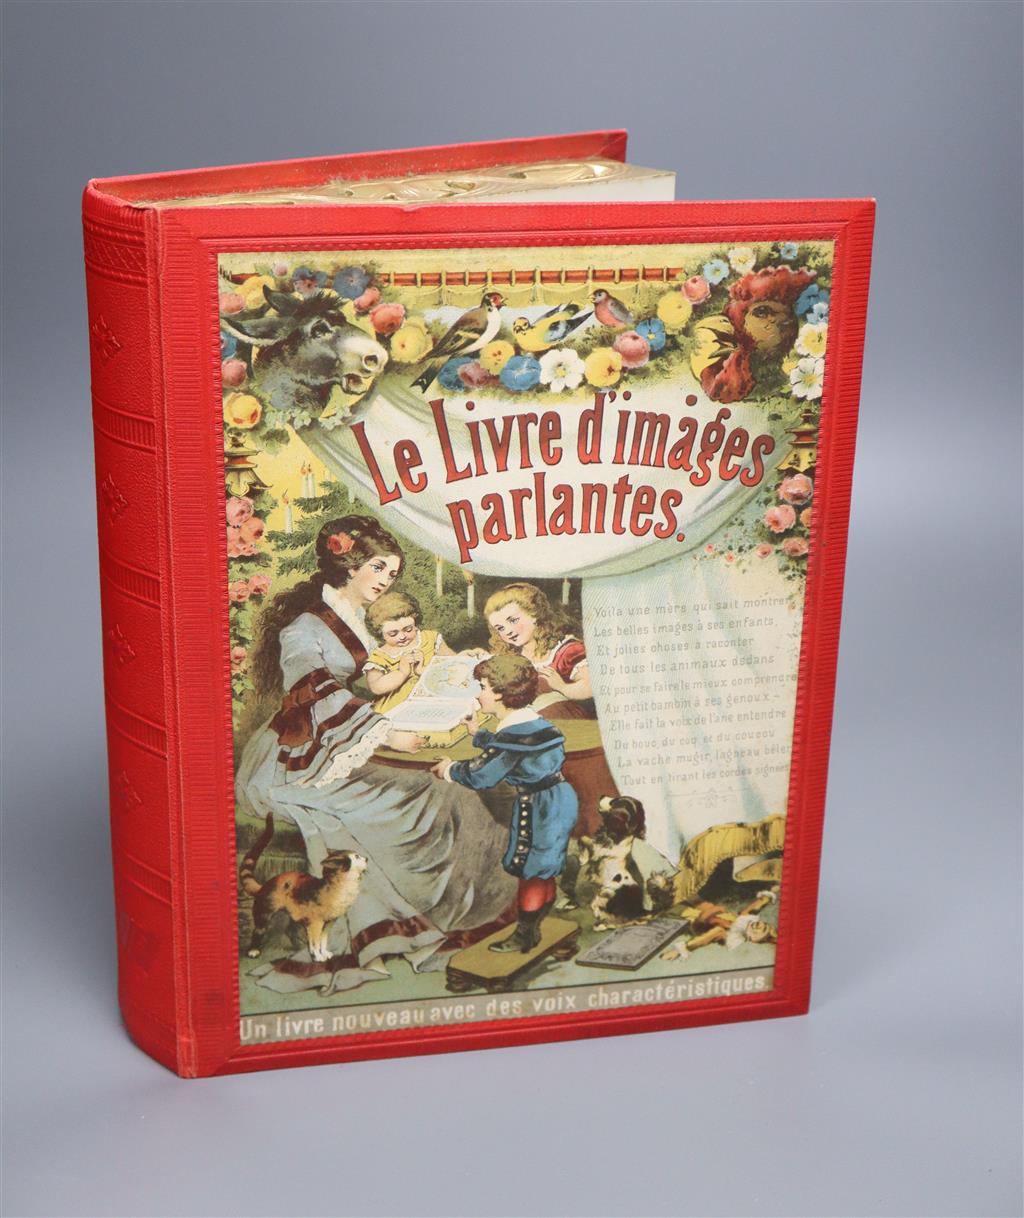 A French talking book, Le Livre dImages Parlyntes, cloth in good condition